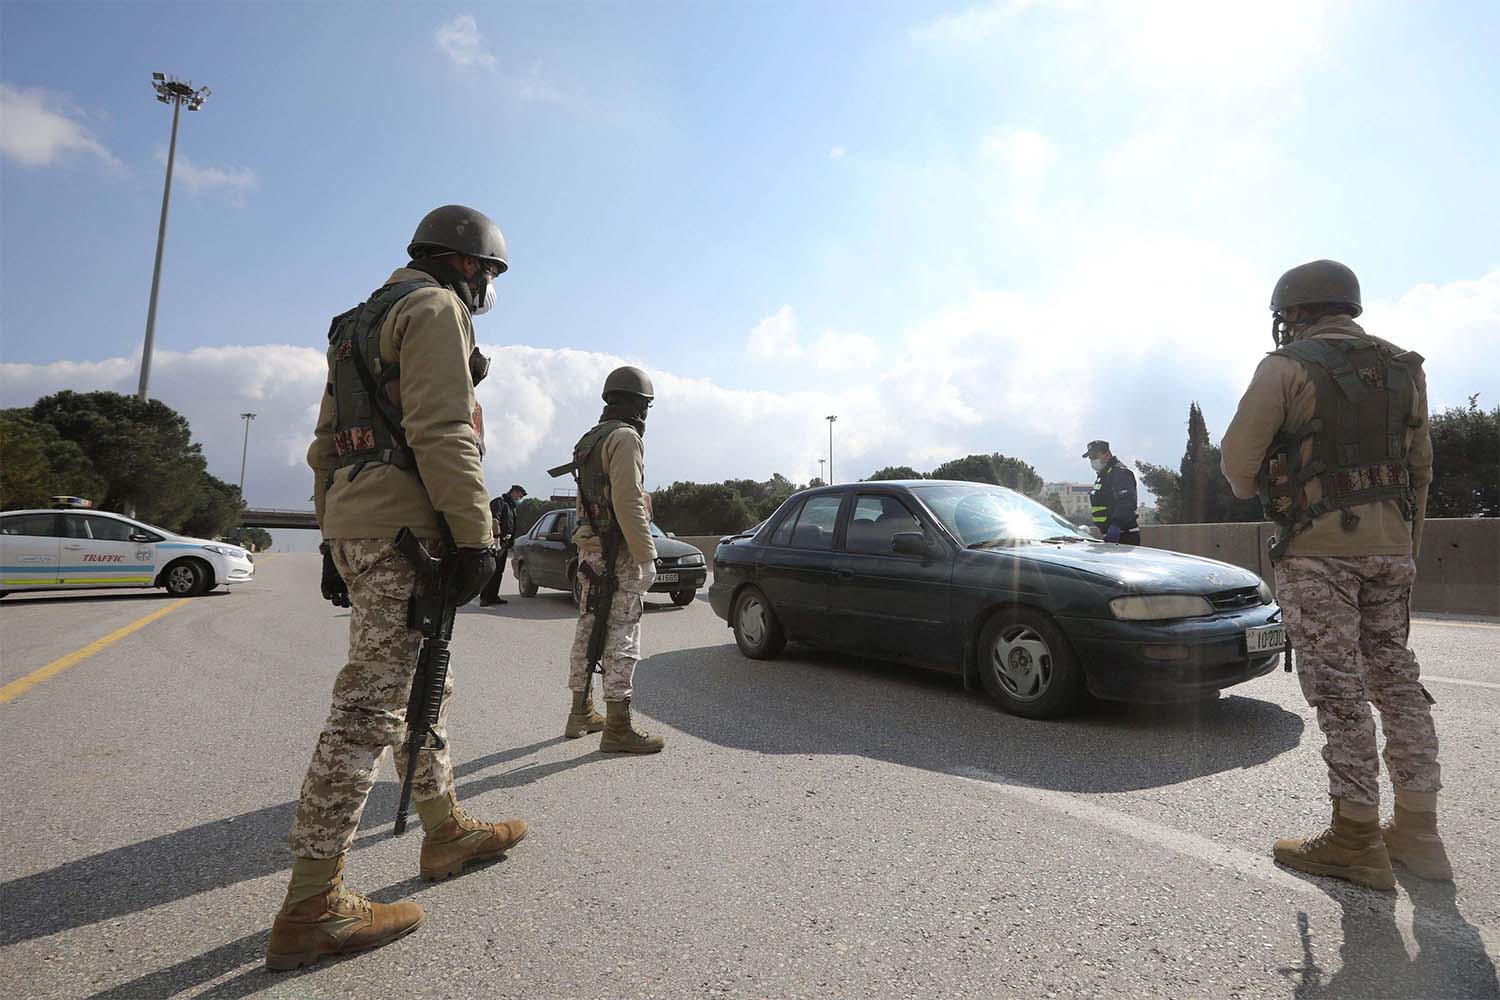 Jordanian army members and police personnel guard at a checkpoint during the second day of a nationwide curfew